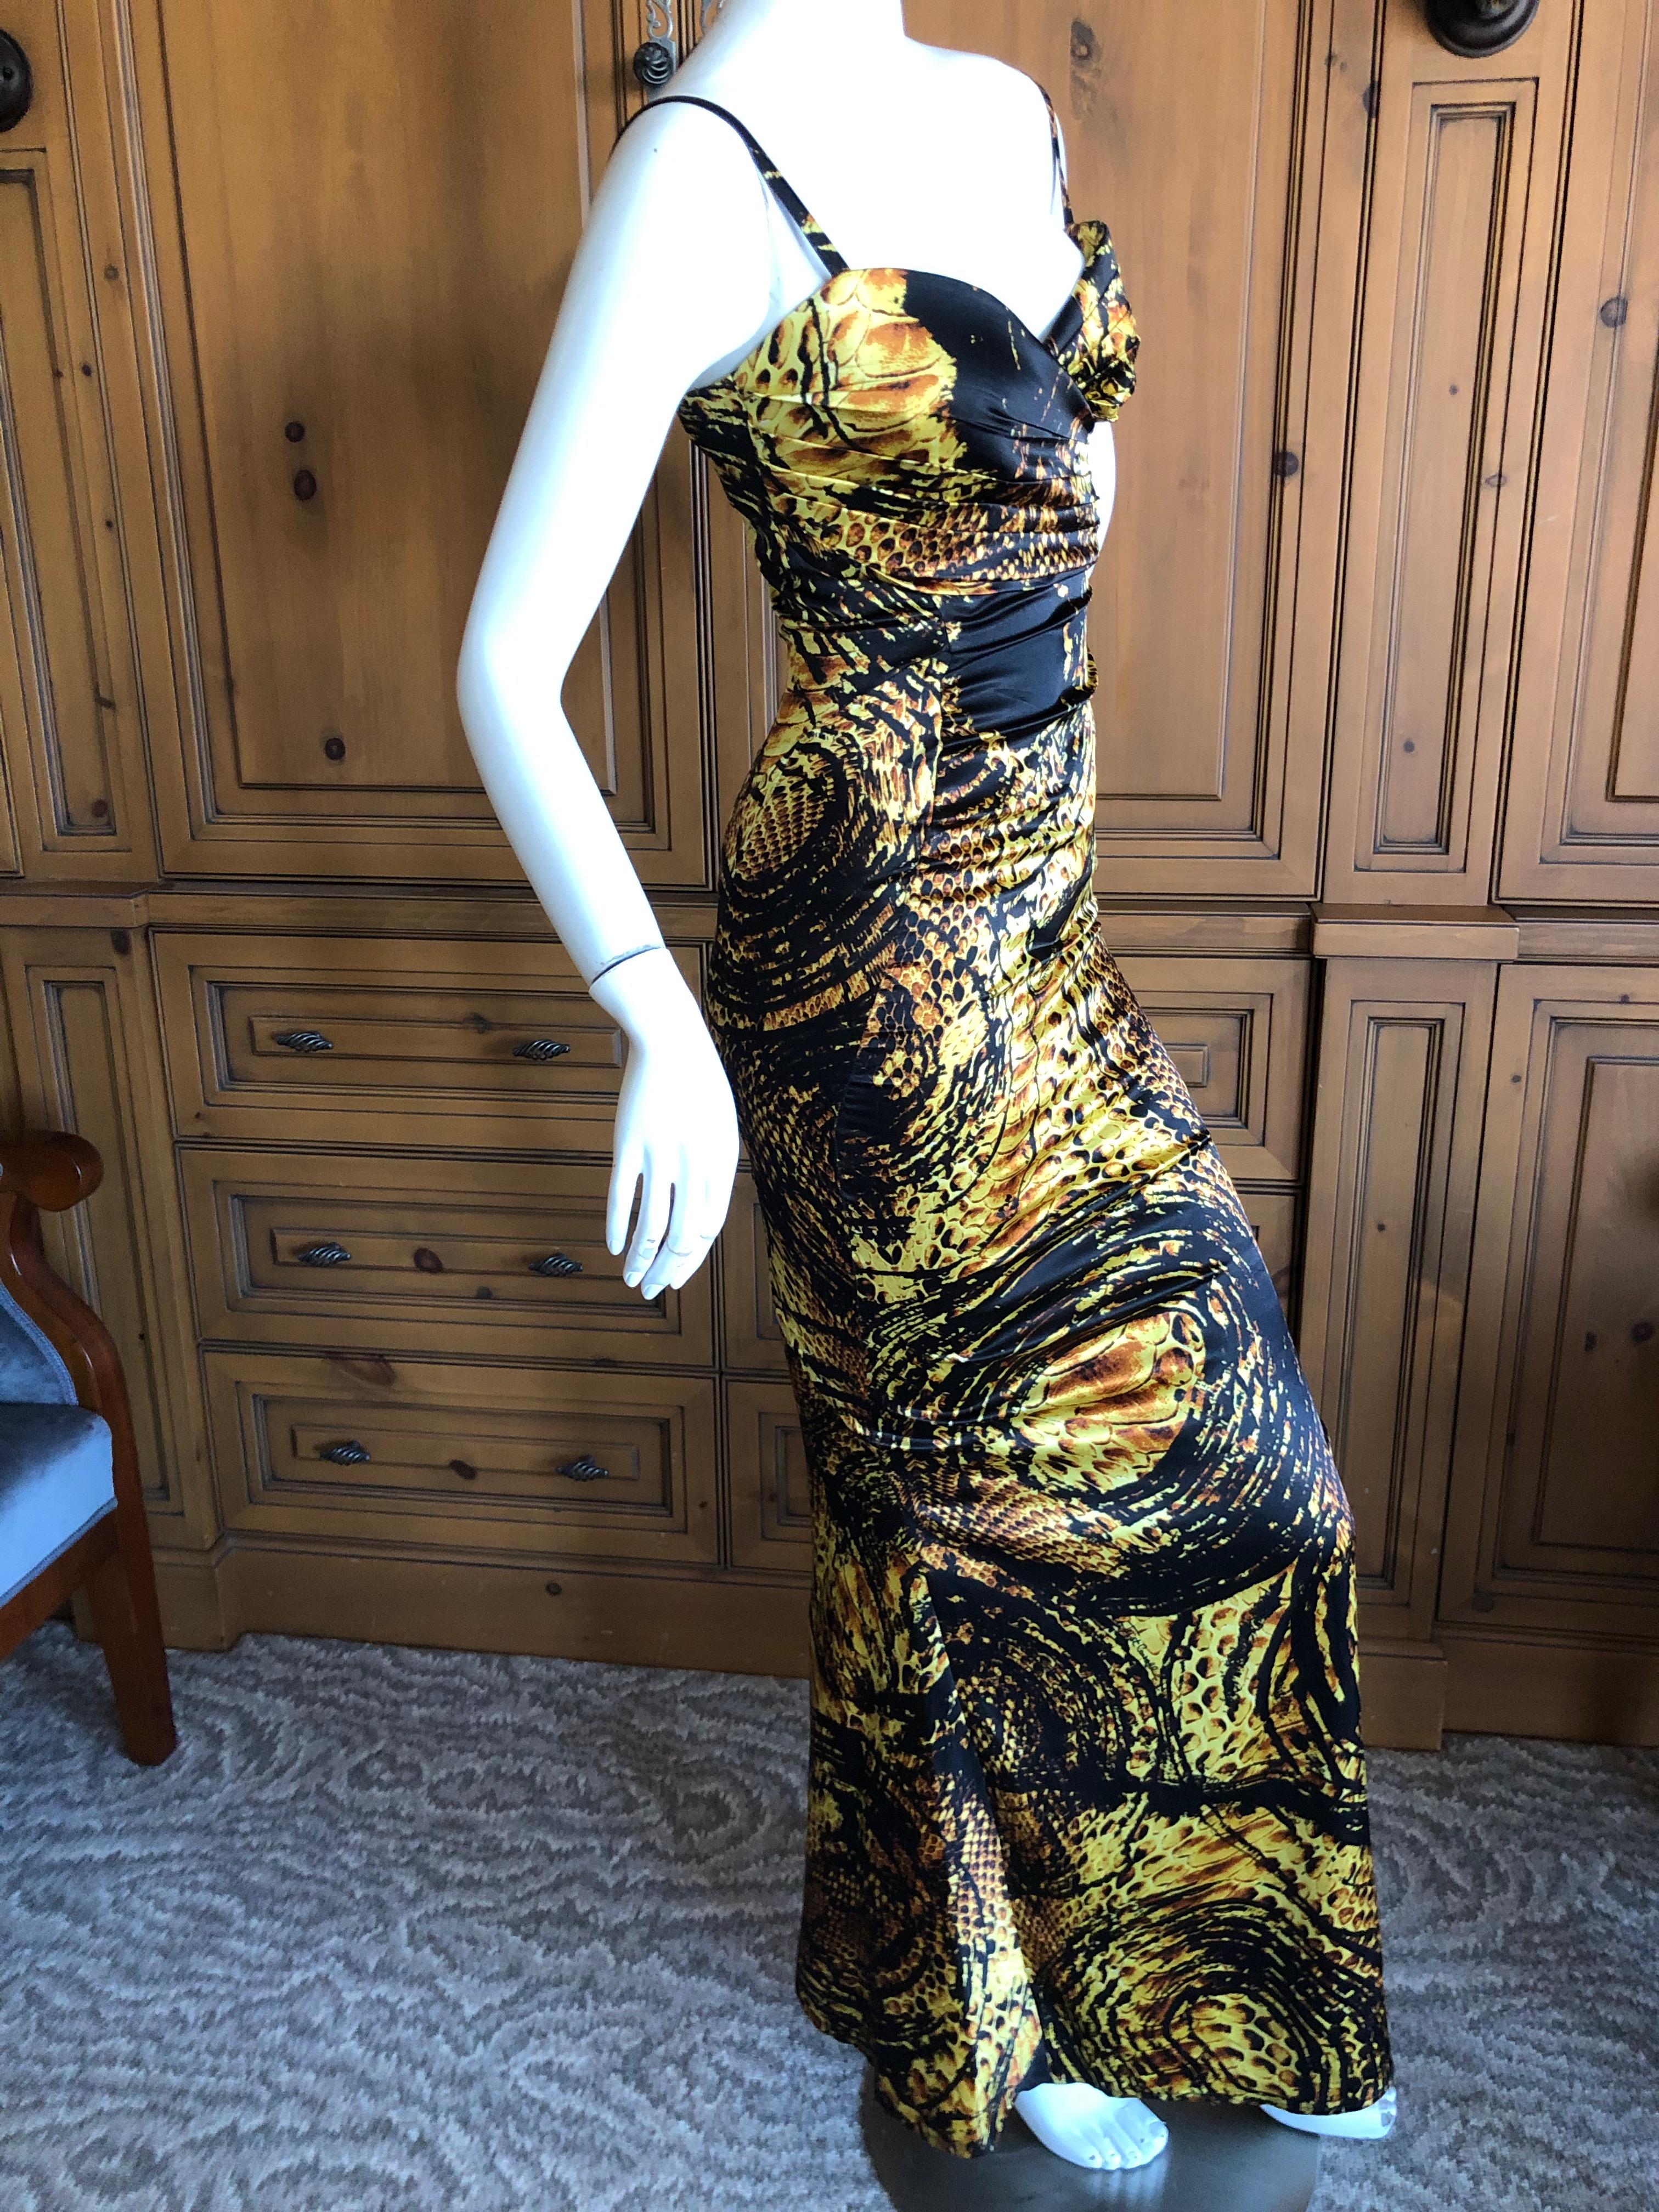 Women's Roberto Cavalli Gold Reptile Print Evening Dress for Just Cavalli For Sale